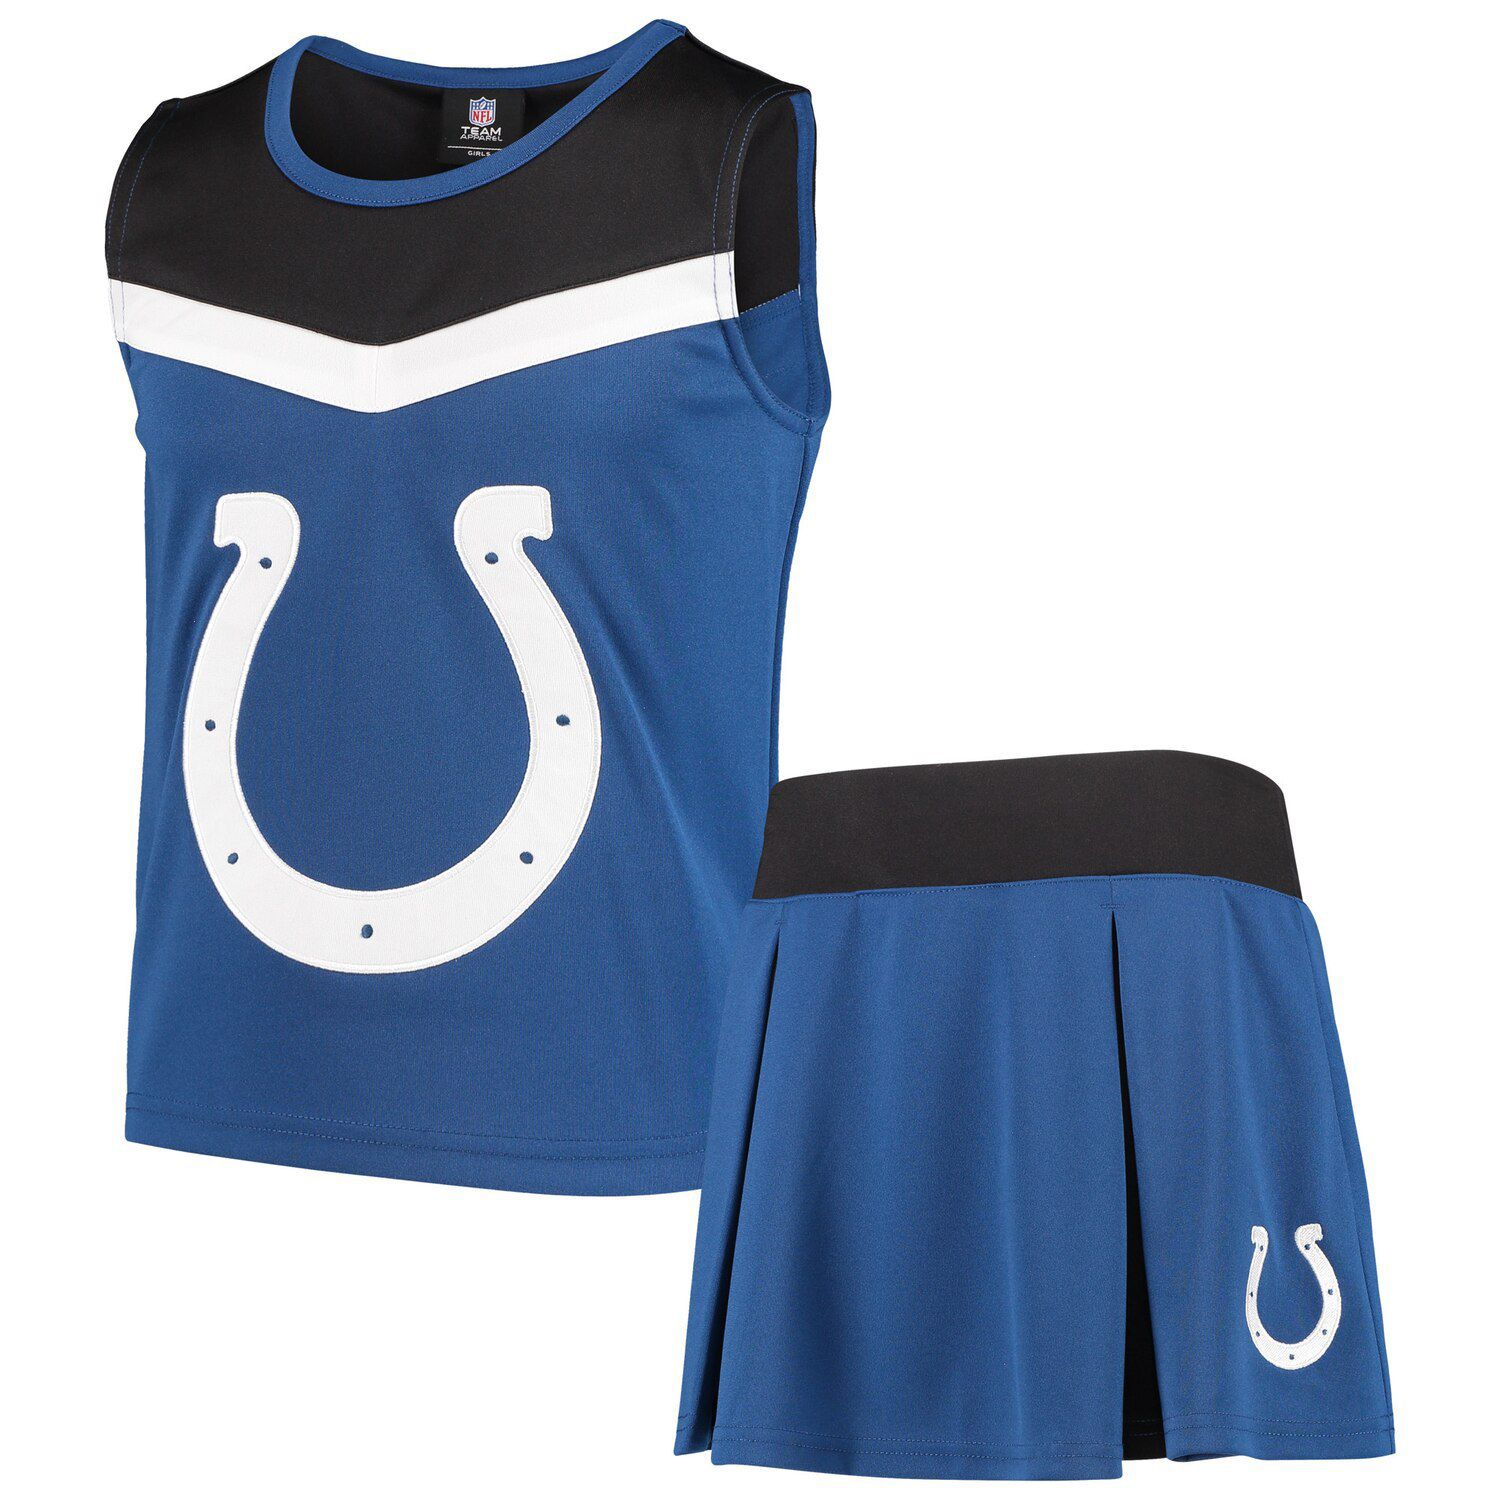 indianapolis colts spirit jersey